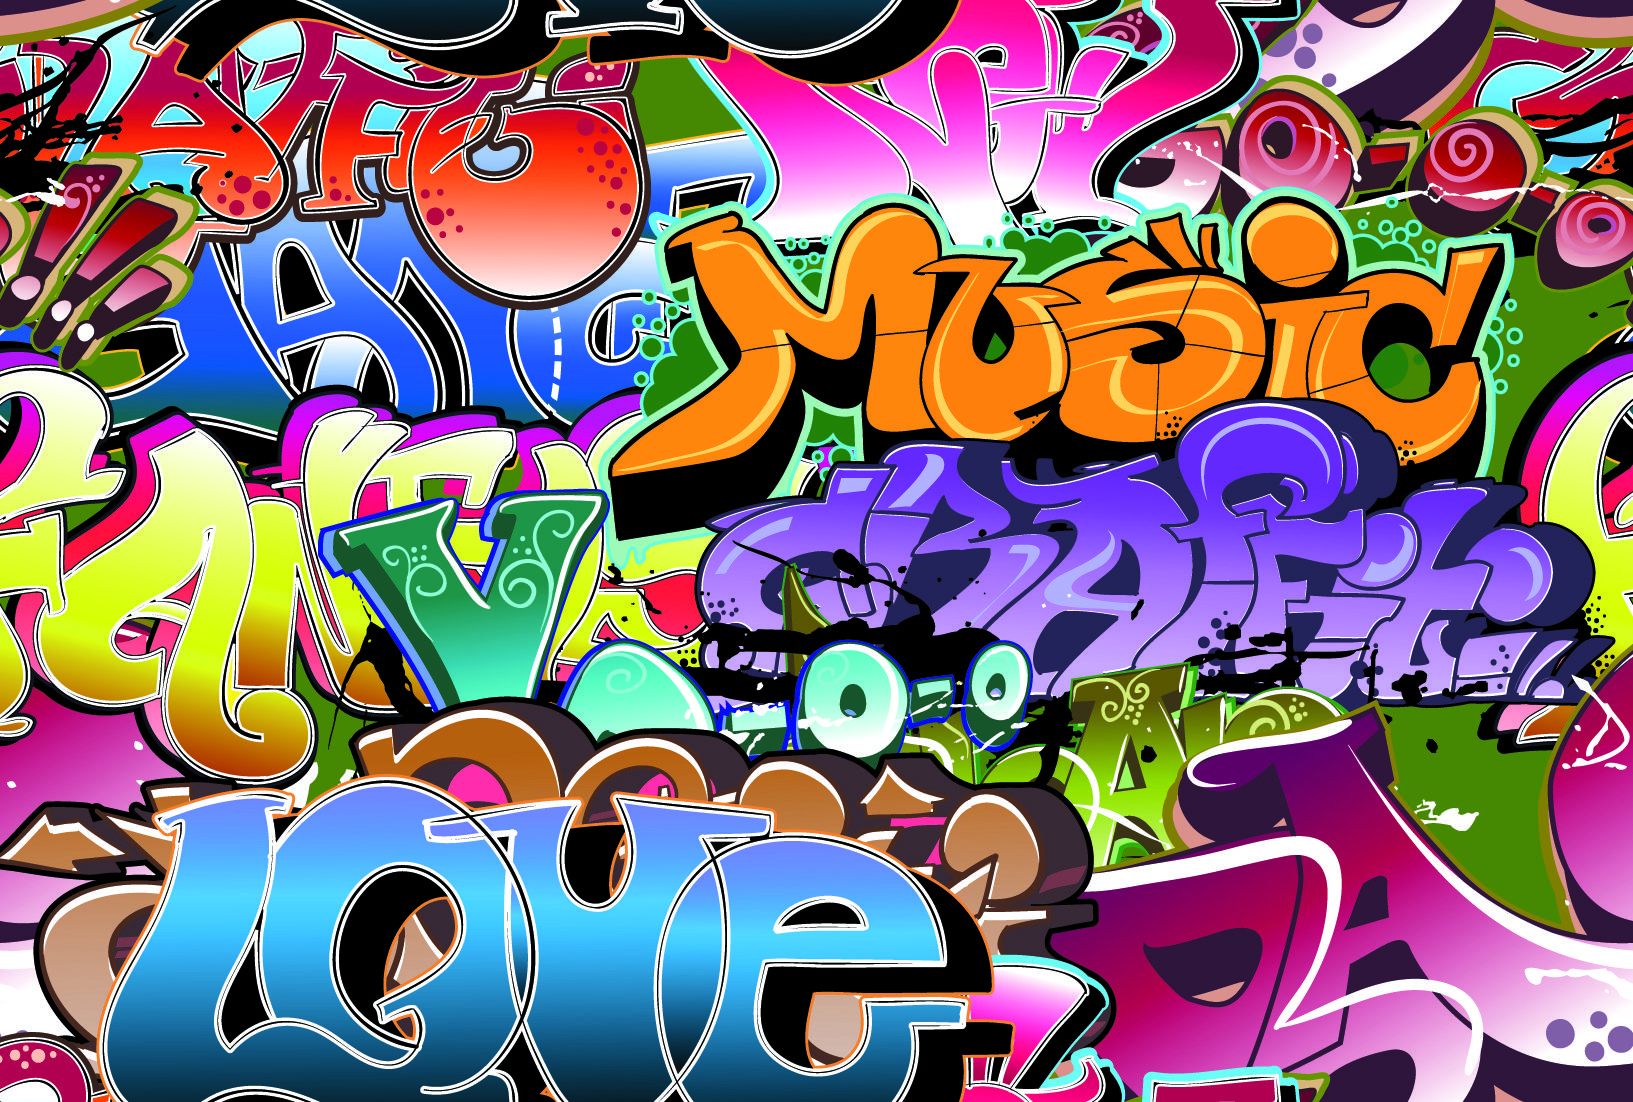 Free download Graffiti Wallpapers Designs Group 65 [1633x1102] for 1633x1102